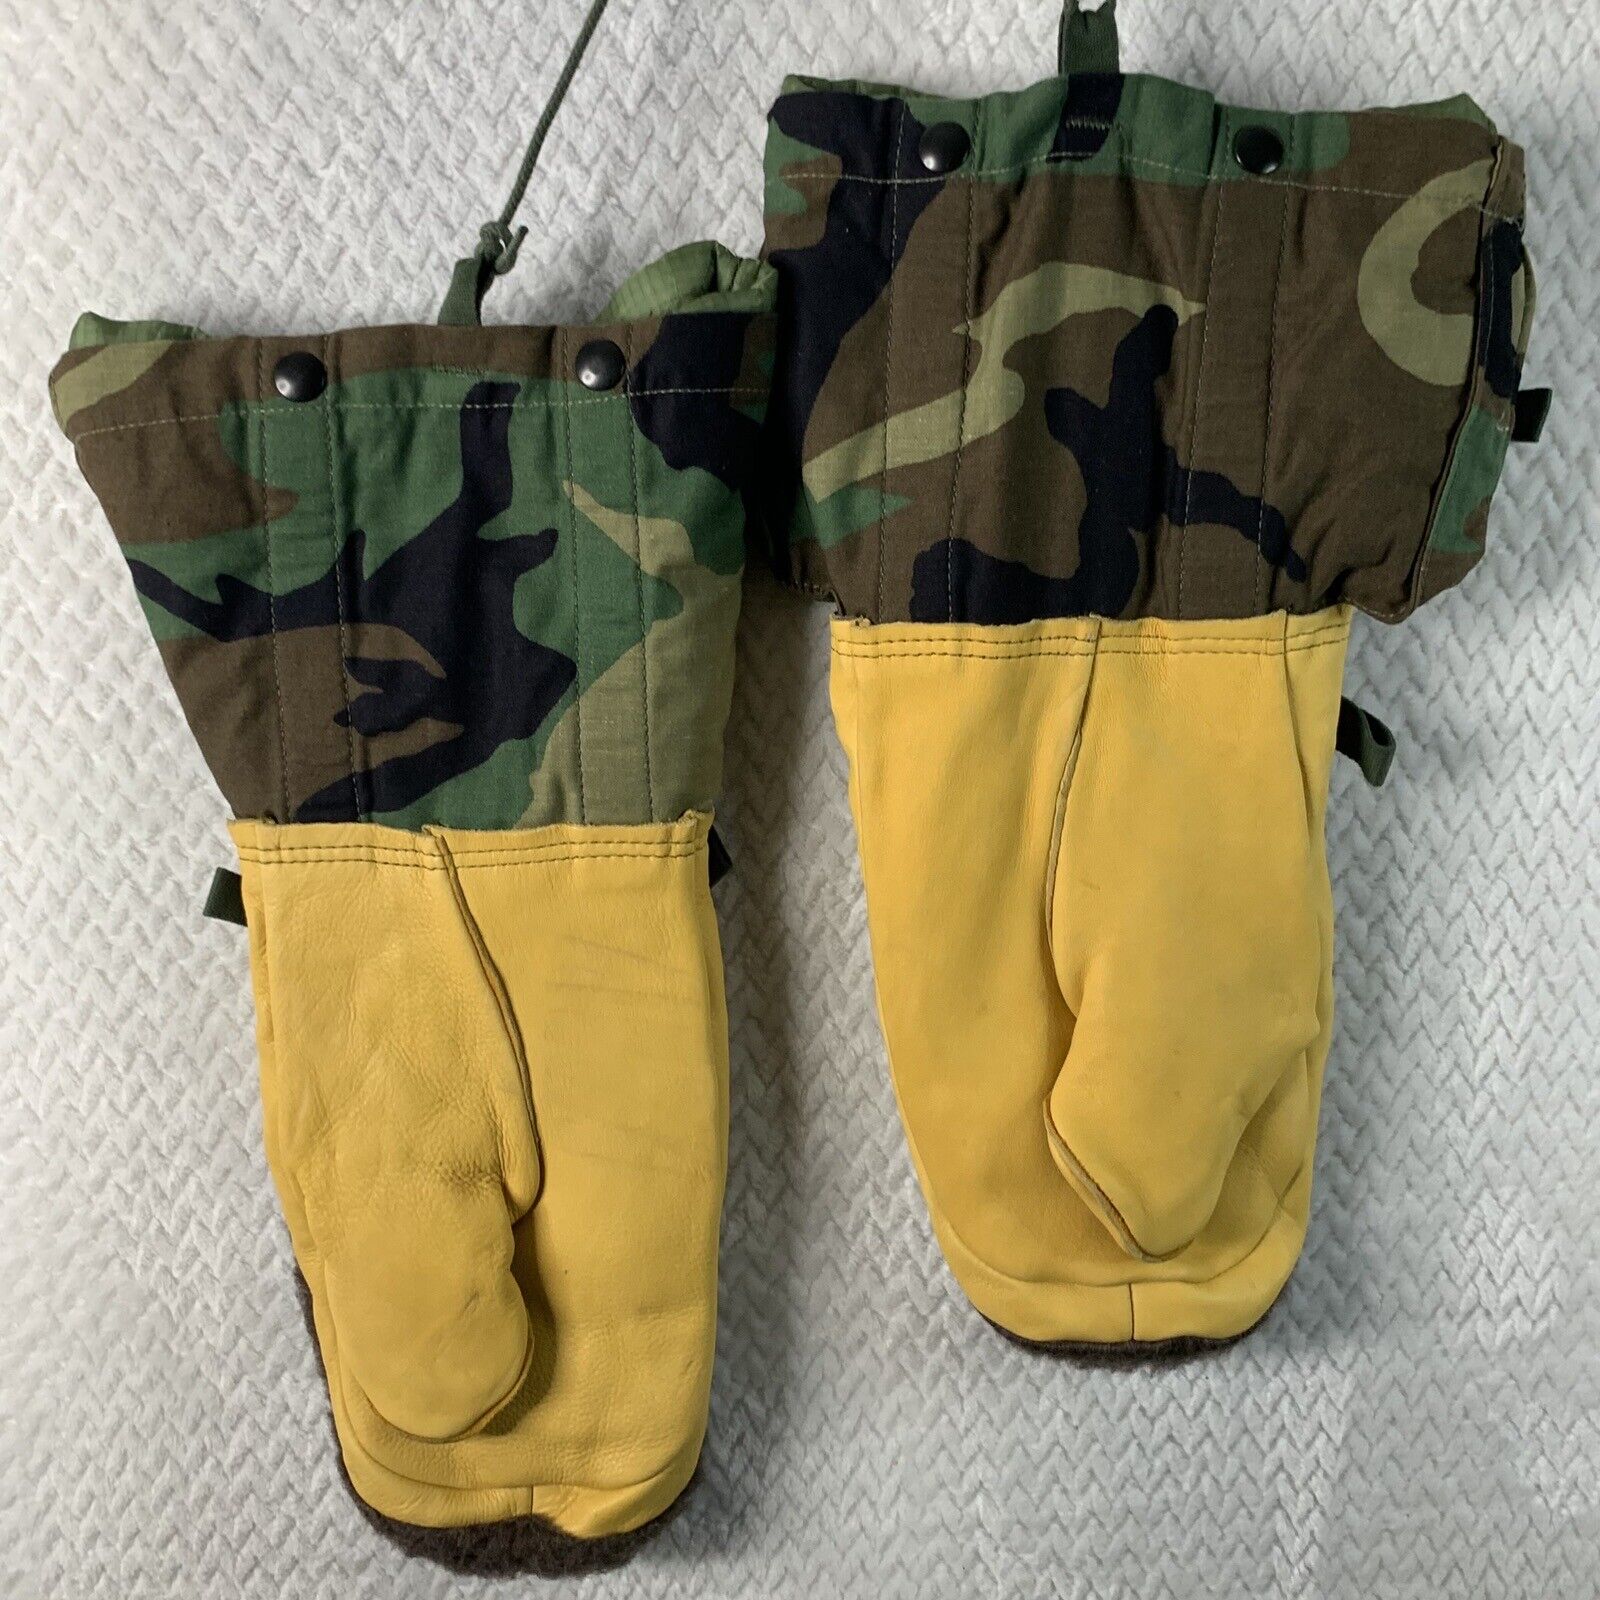 New US Military Extreme Cold Weather Mittens Gloves Woodland Camo Sz Medium